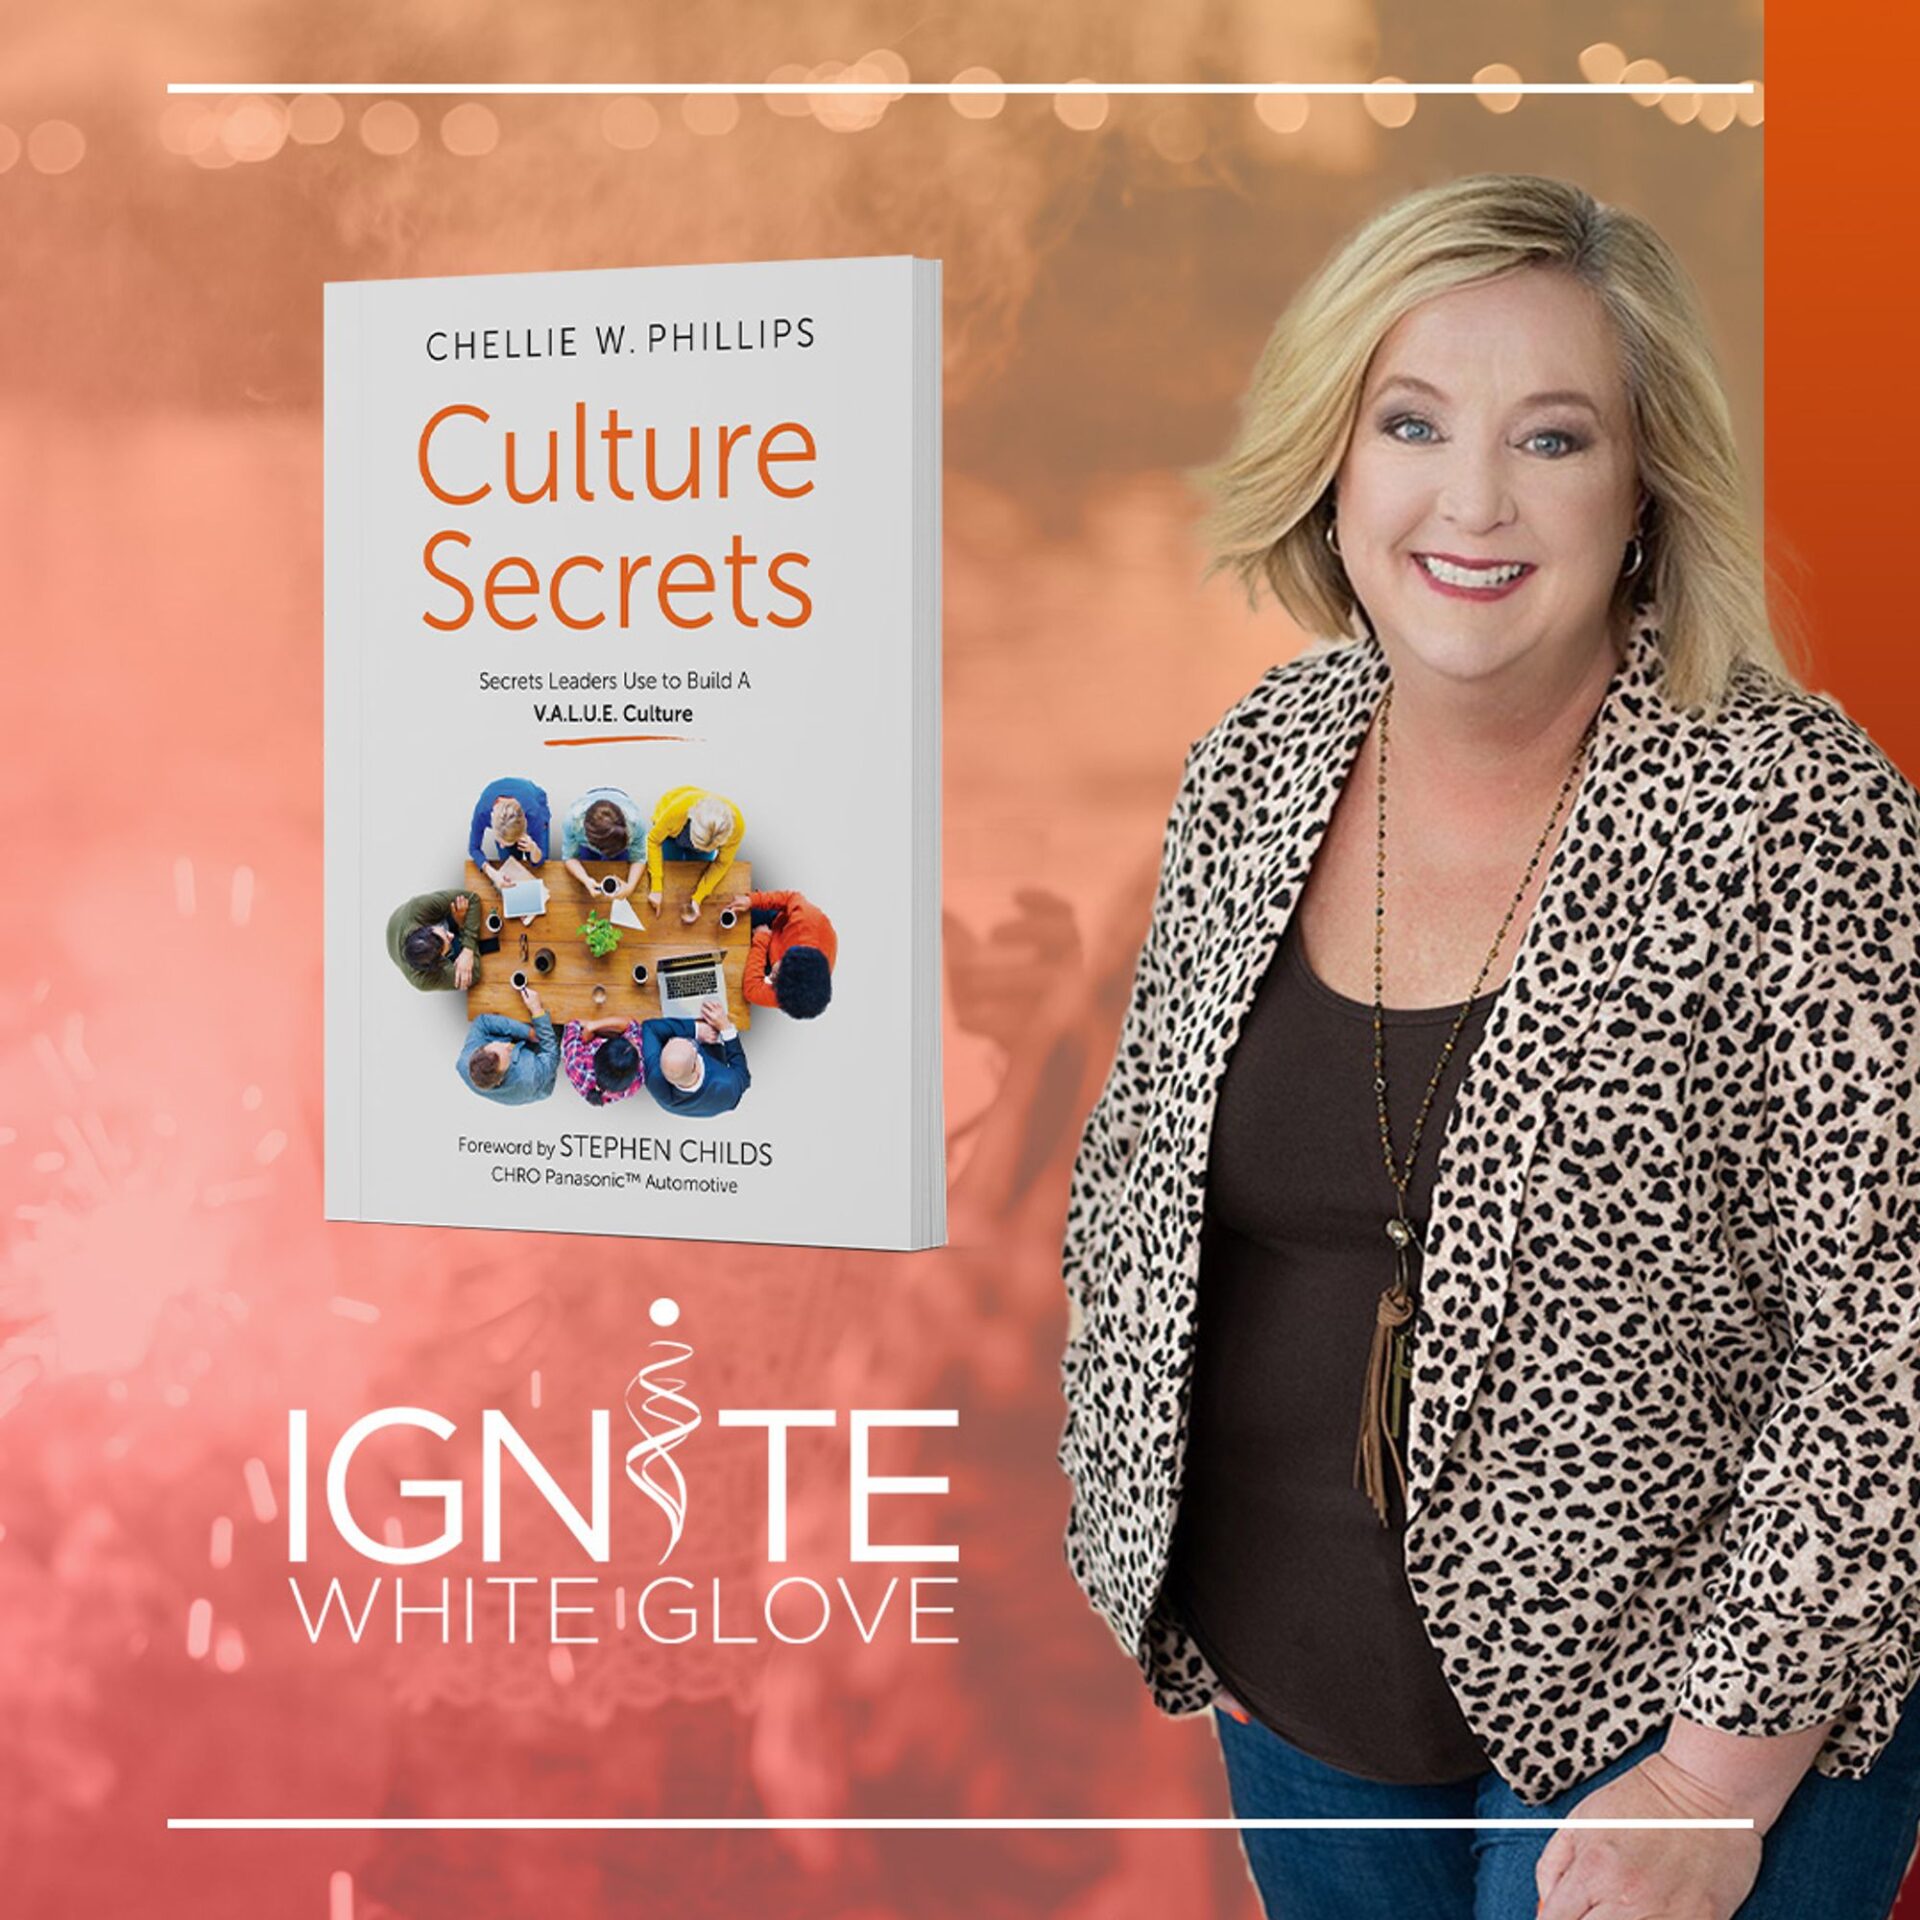 Author Chellie Phillips and Cover image of Culture Secrets book